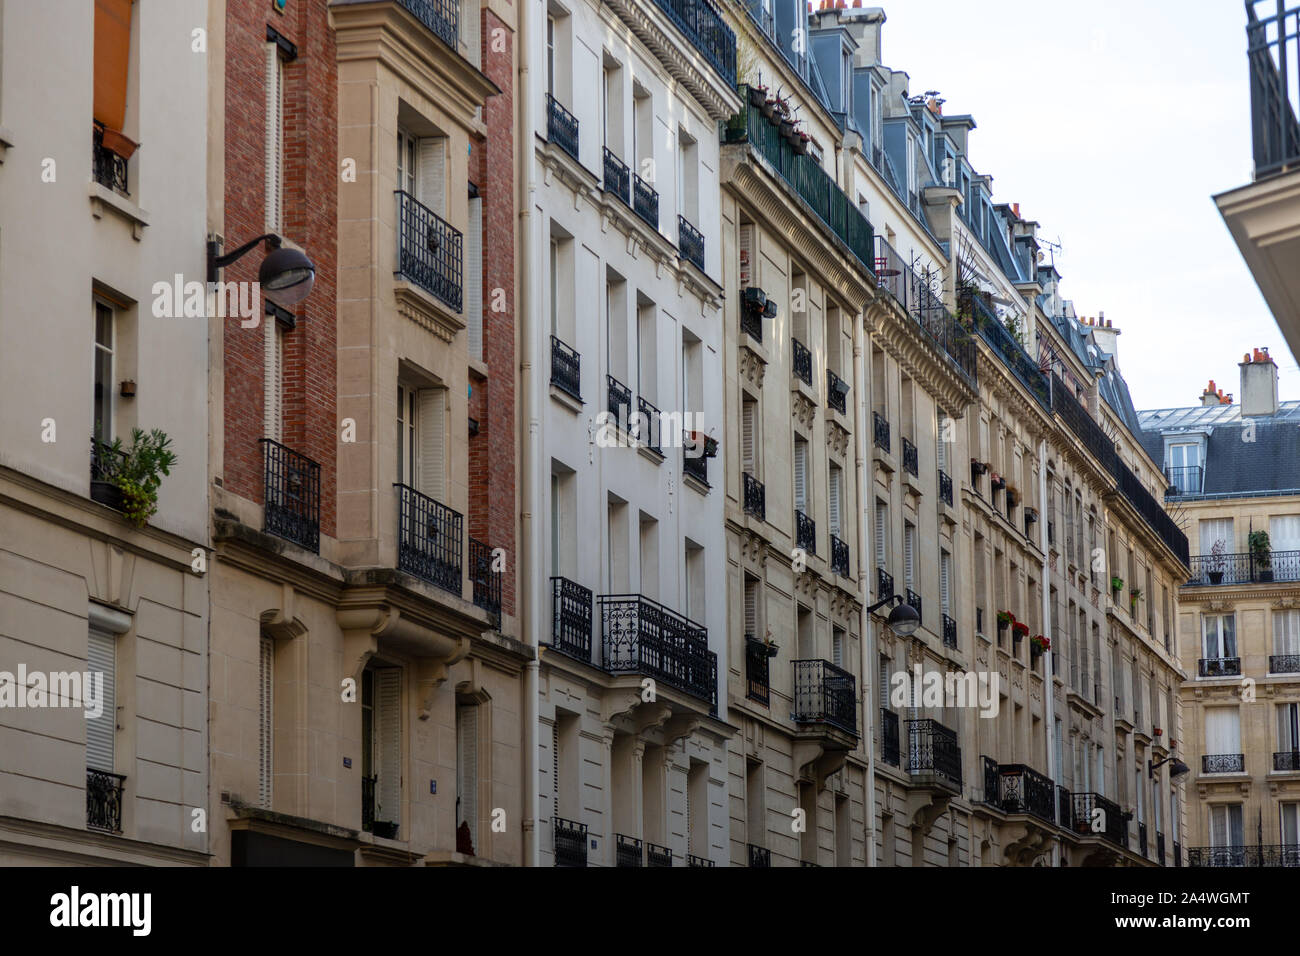 Street scenes in the old districts in Paris, France on August 5, 2019. Stock Photo